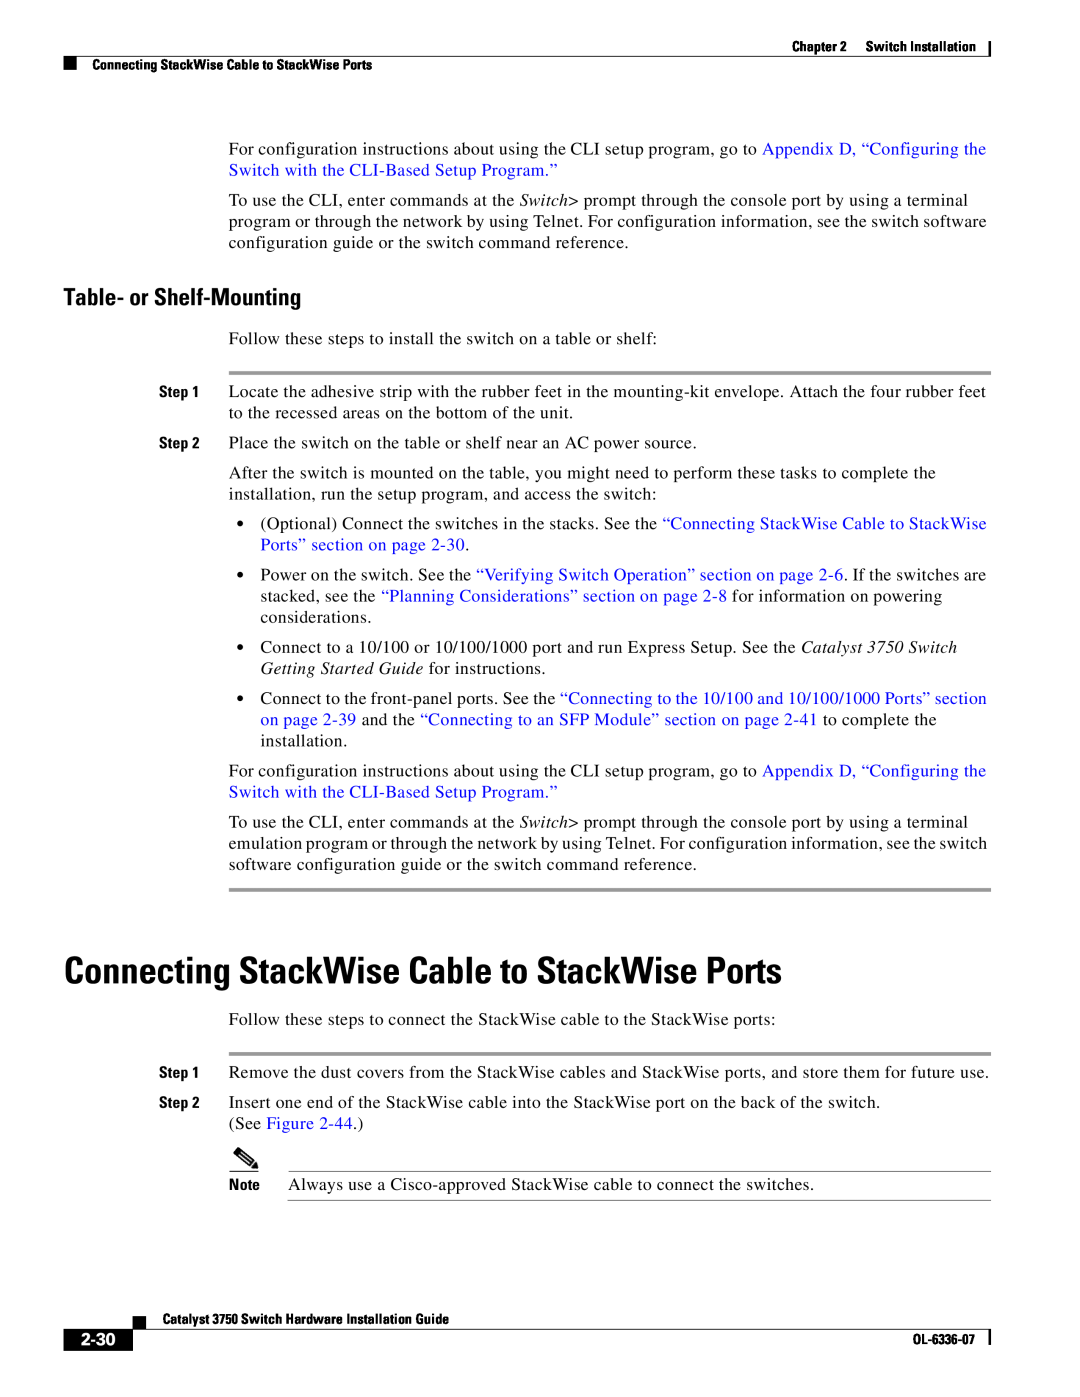 Cisco Systems WSC3750X24TS specifications Connecting StackWise Cable to StackWise Ports, Table- or Shelf-Mounting, 2-30 